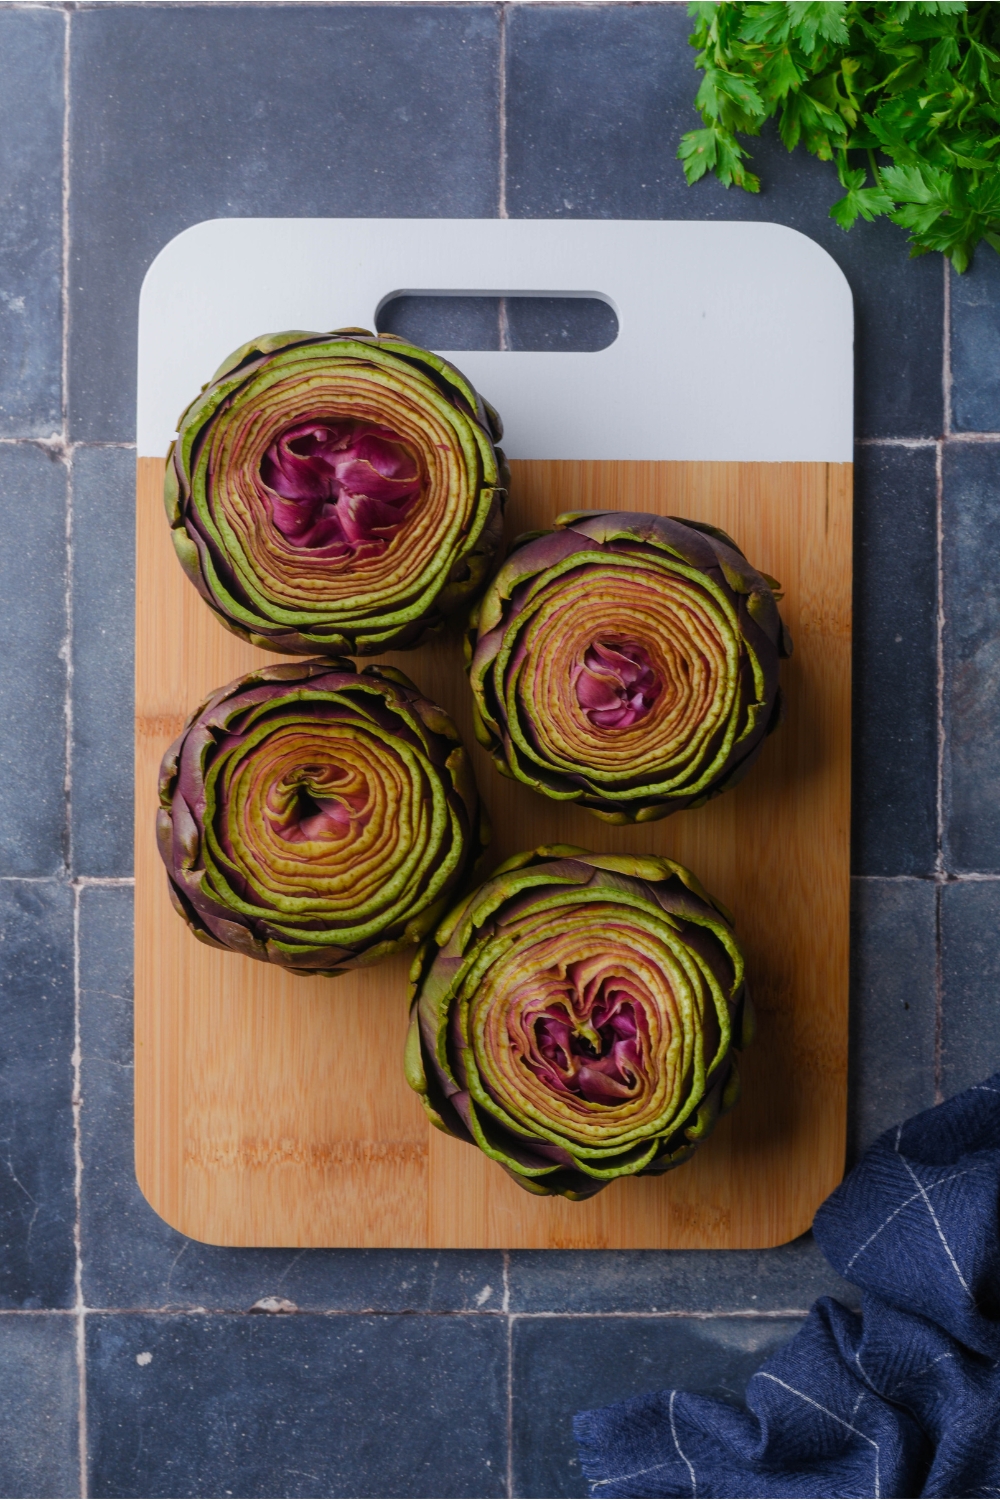 Overhead view of four trimmed whole artichokes on a wooden board.